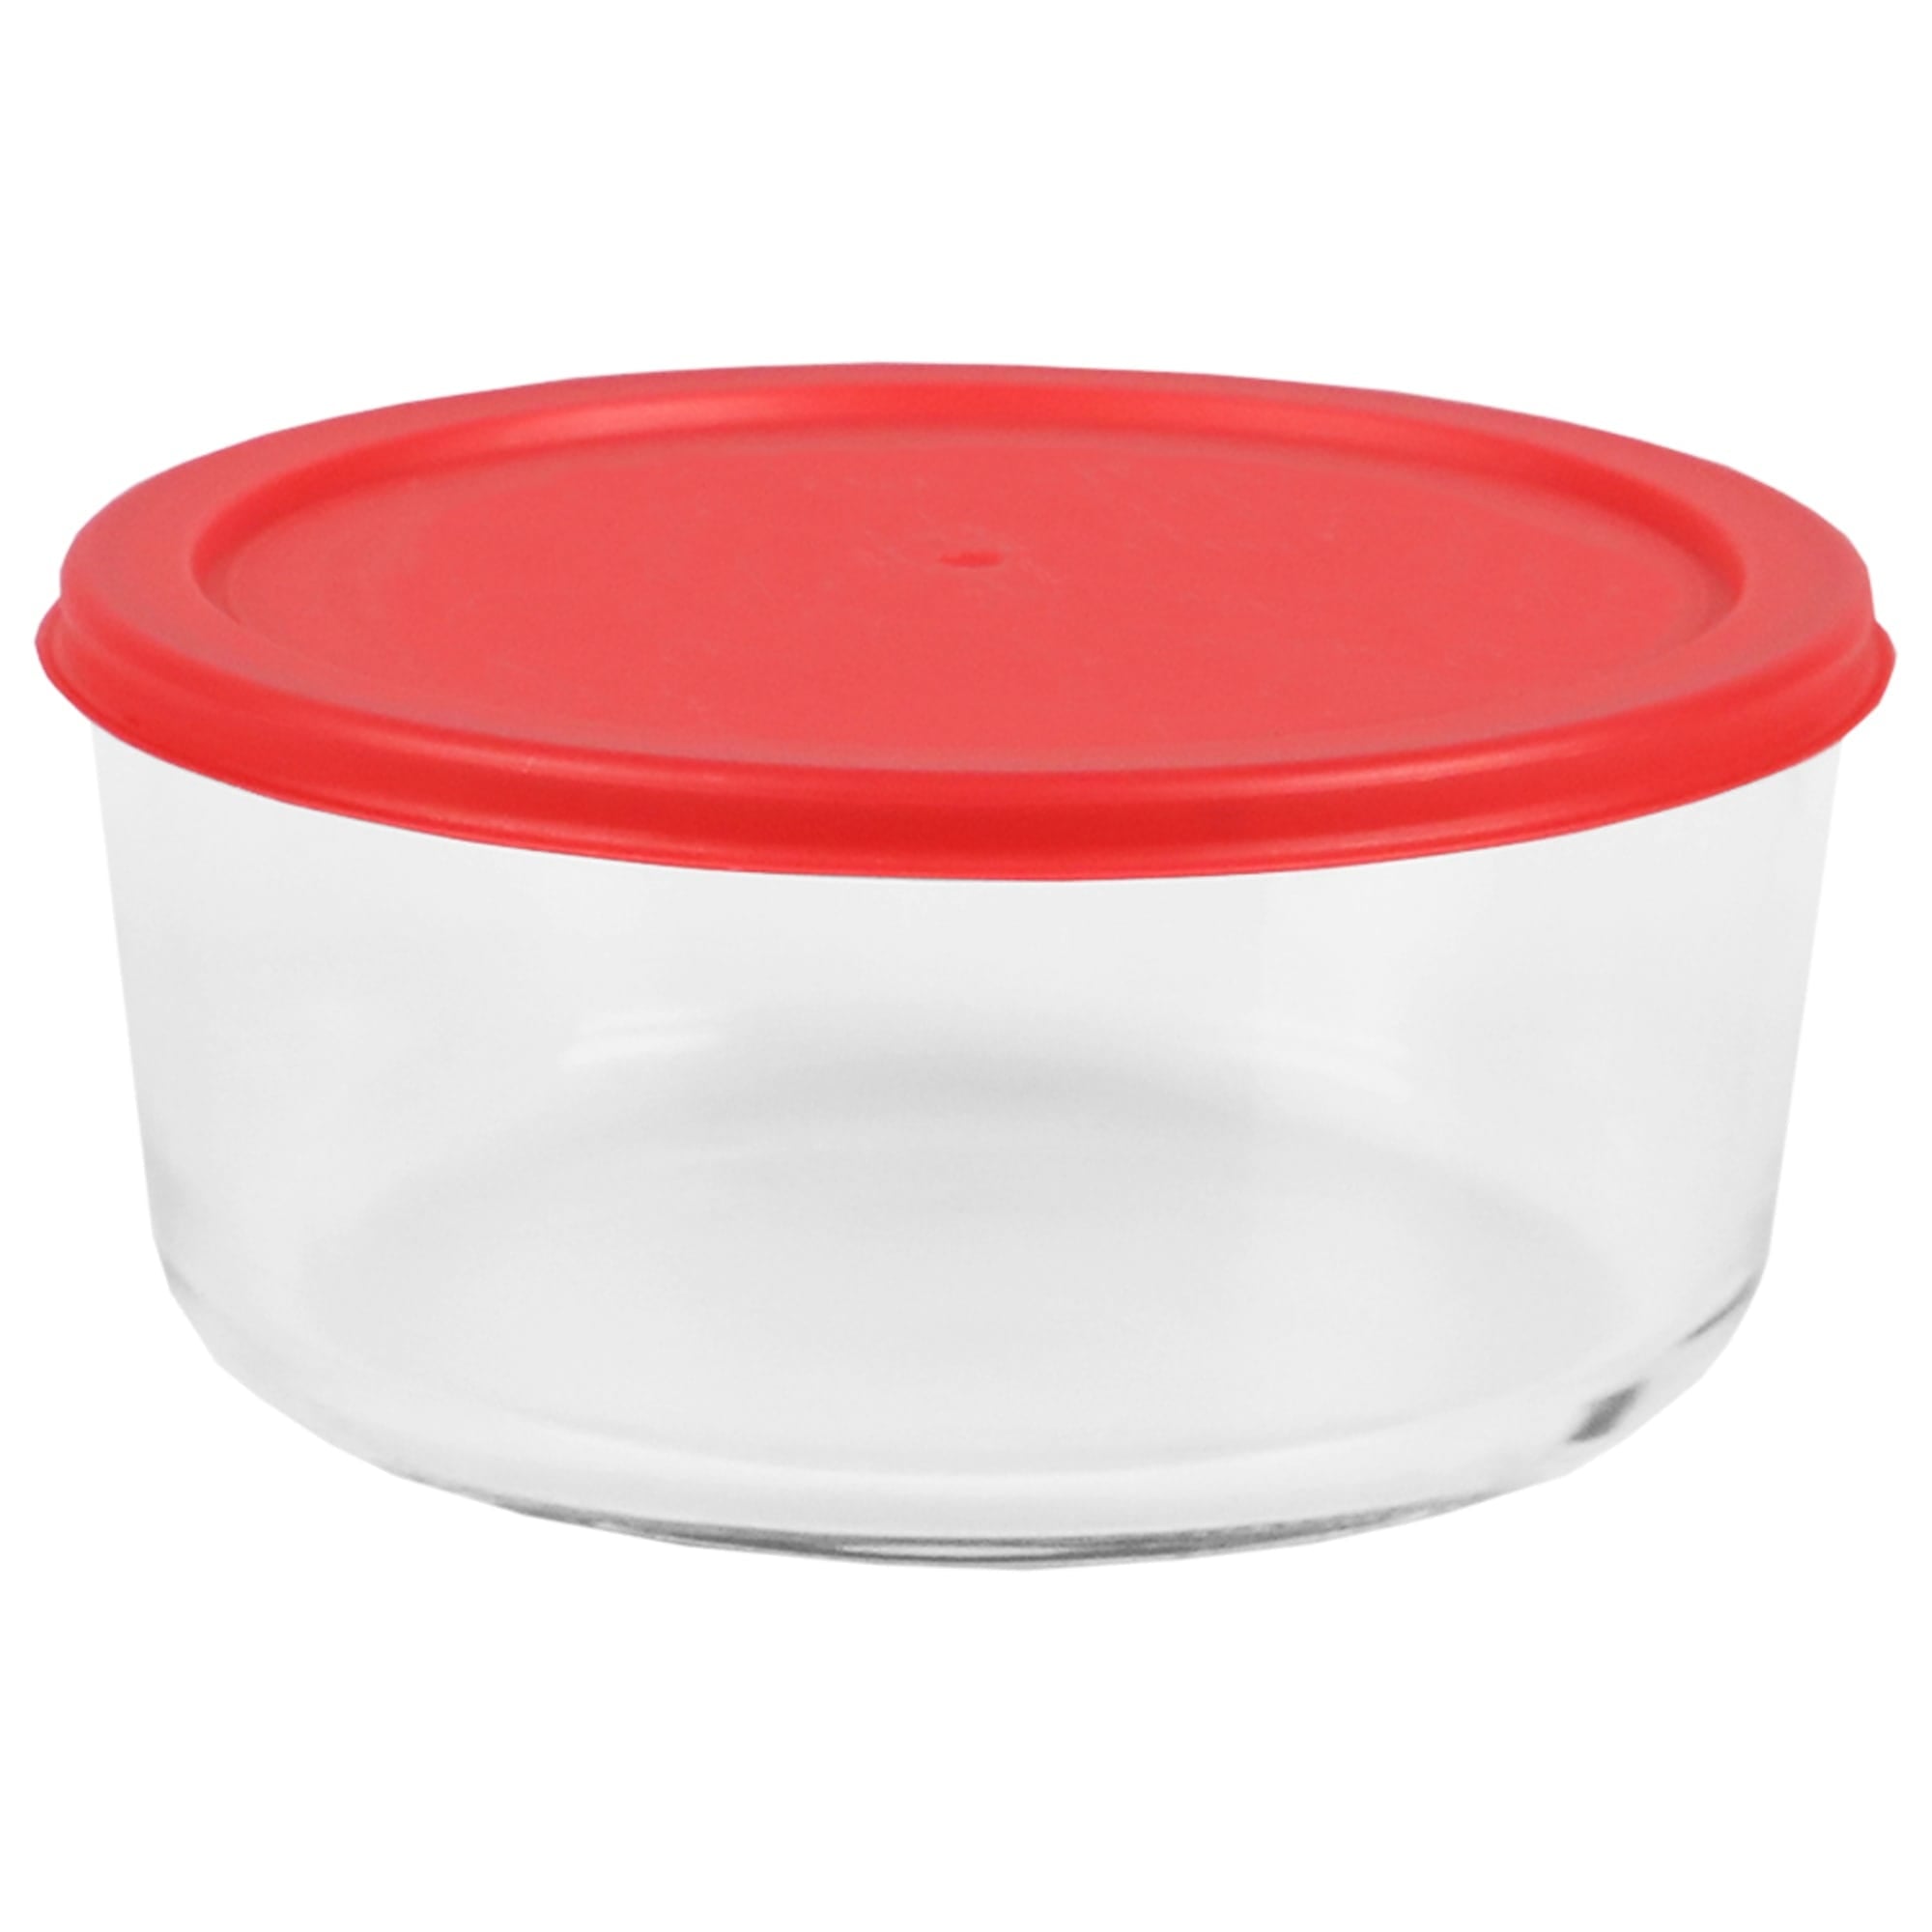 Home Basics Round 55 oz. Glass Food Storage Container with Red Lid, Clear $6.00 EACH, CASE PACK OF 12